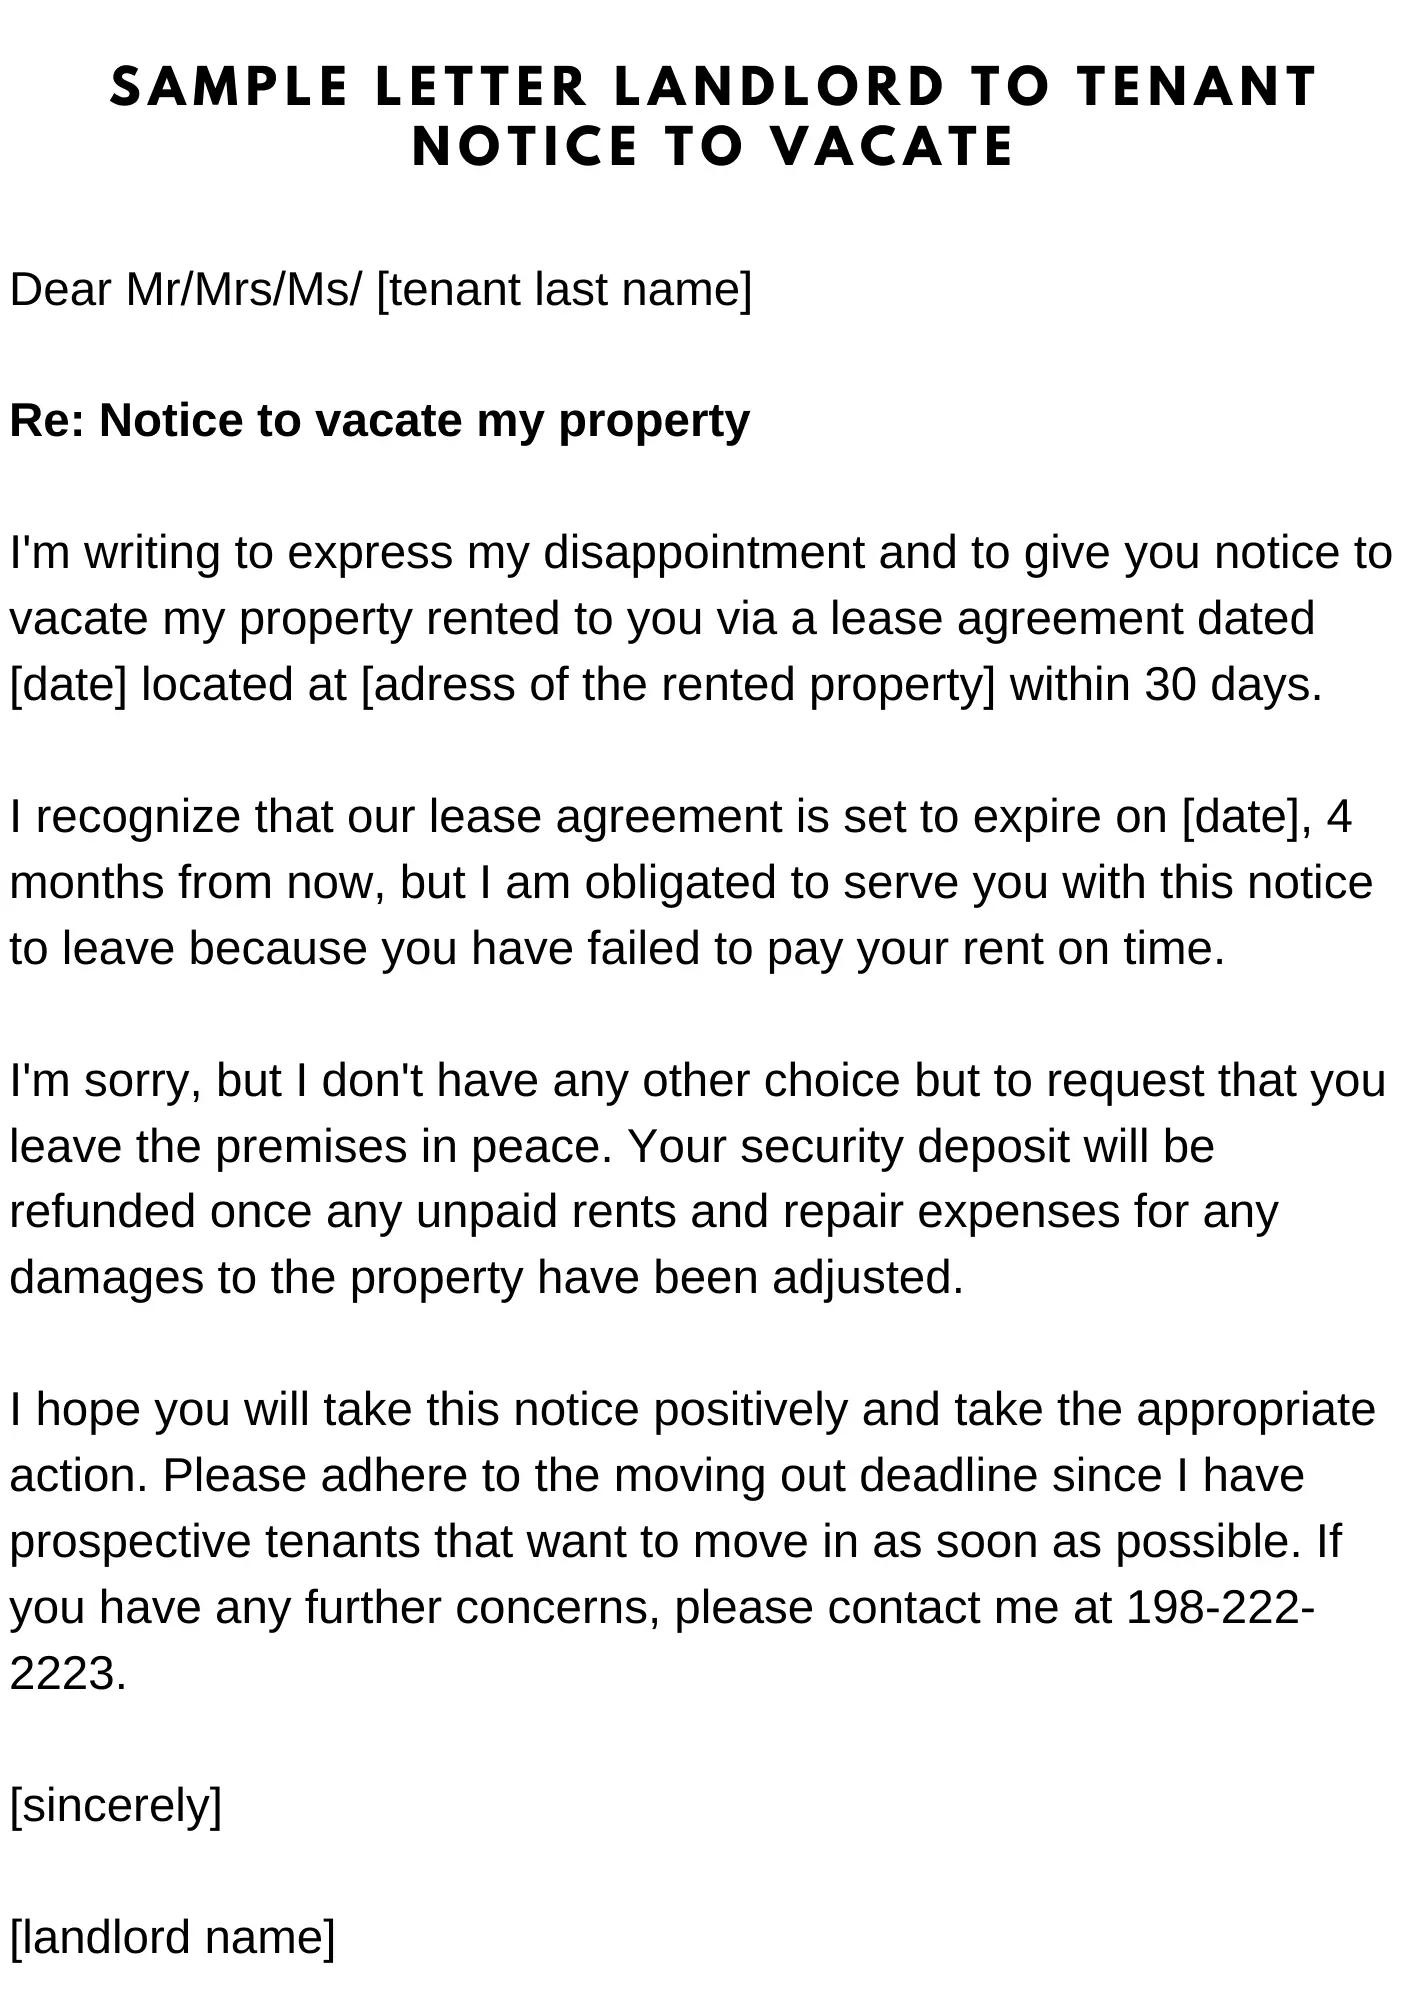 Notice to vacate letter